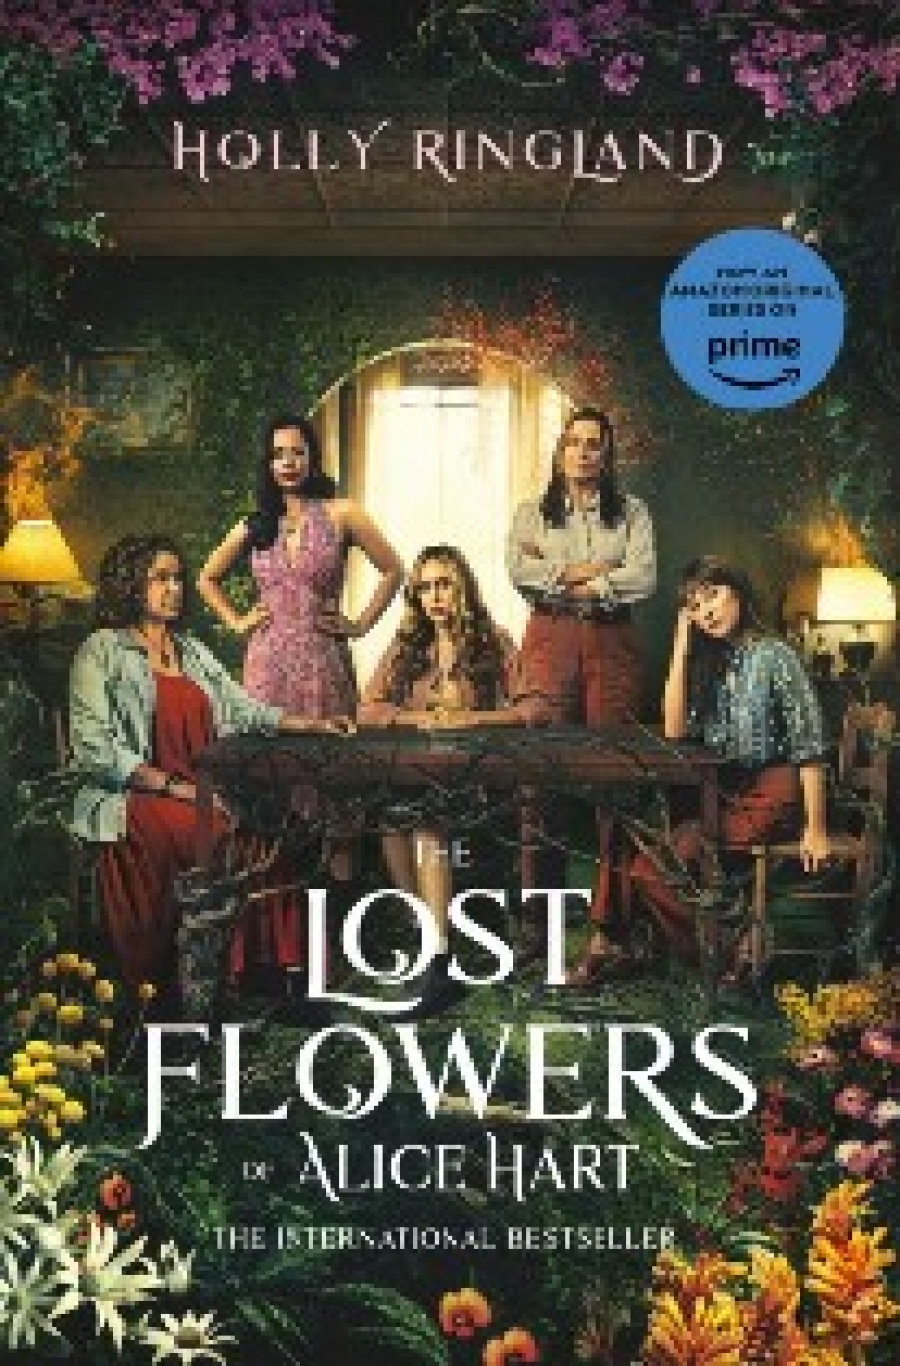 Holly, Ringland Lost flowers of alice hart 